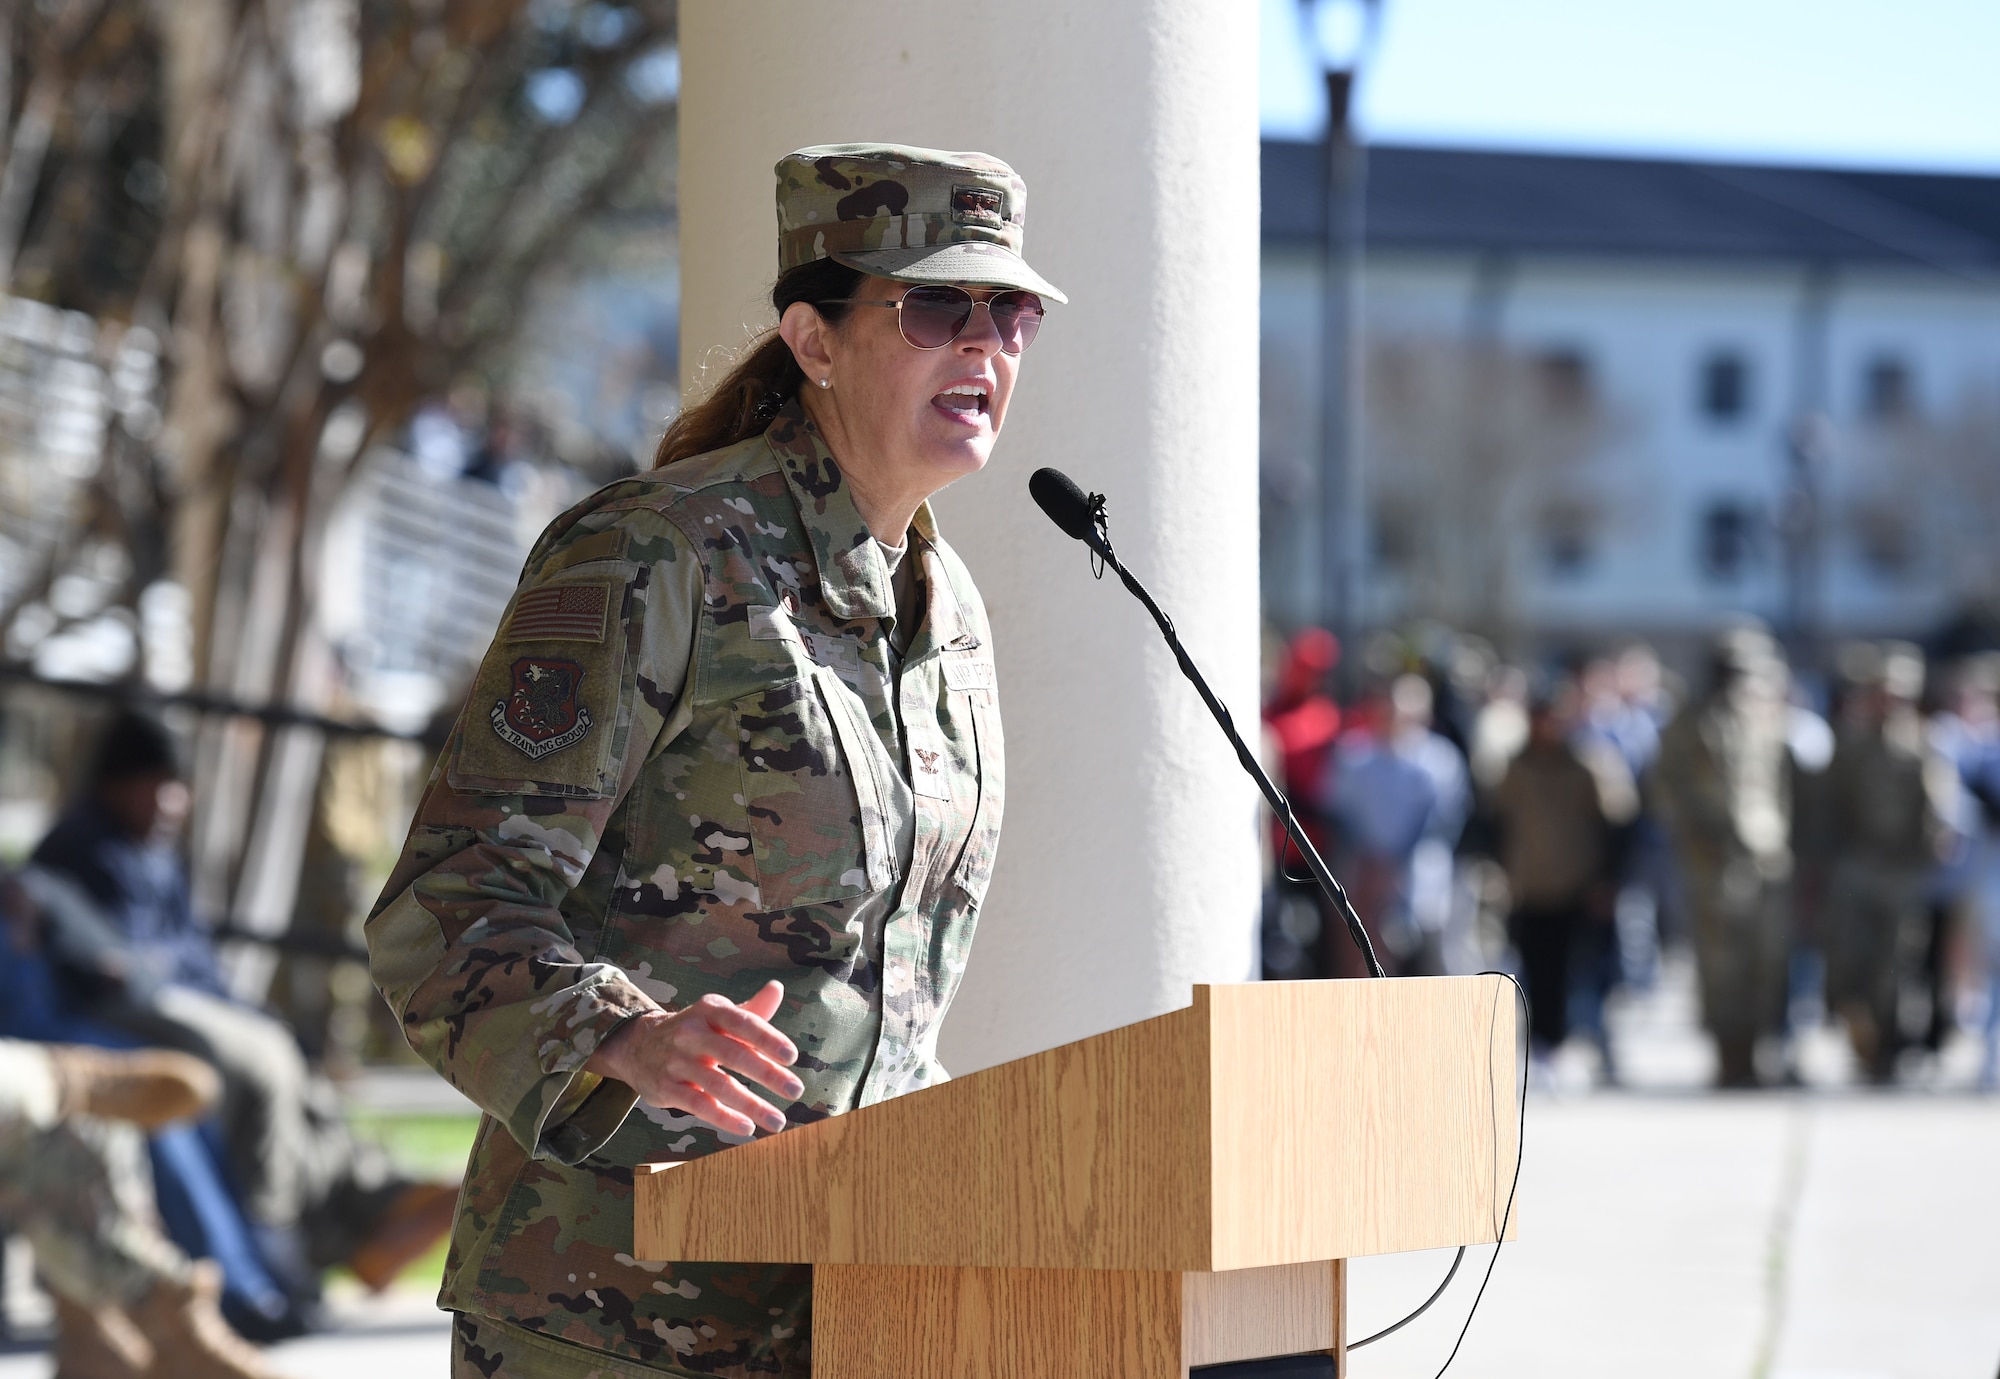 U.S. Air Force Col. Laura King, 81st Training Group commander, delivers remarks during the 81st TRG drill down on the Levitow Training Support Facility drill pad at Keesler Air Force Base, Mississippi, Feb. 23, 2023.